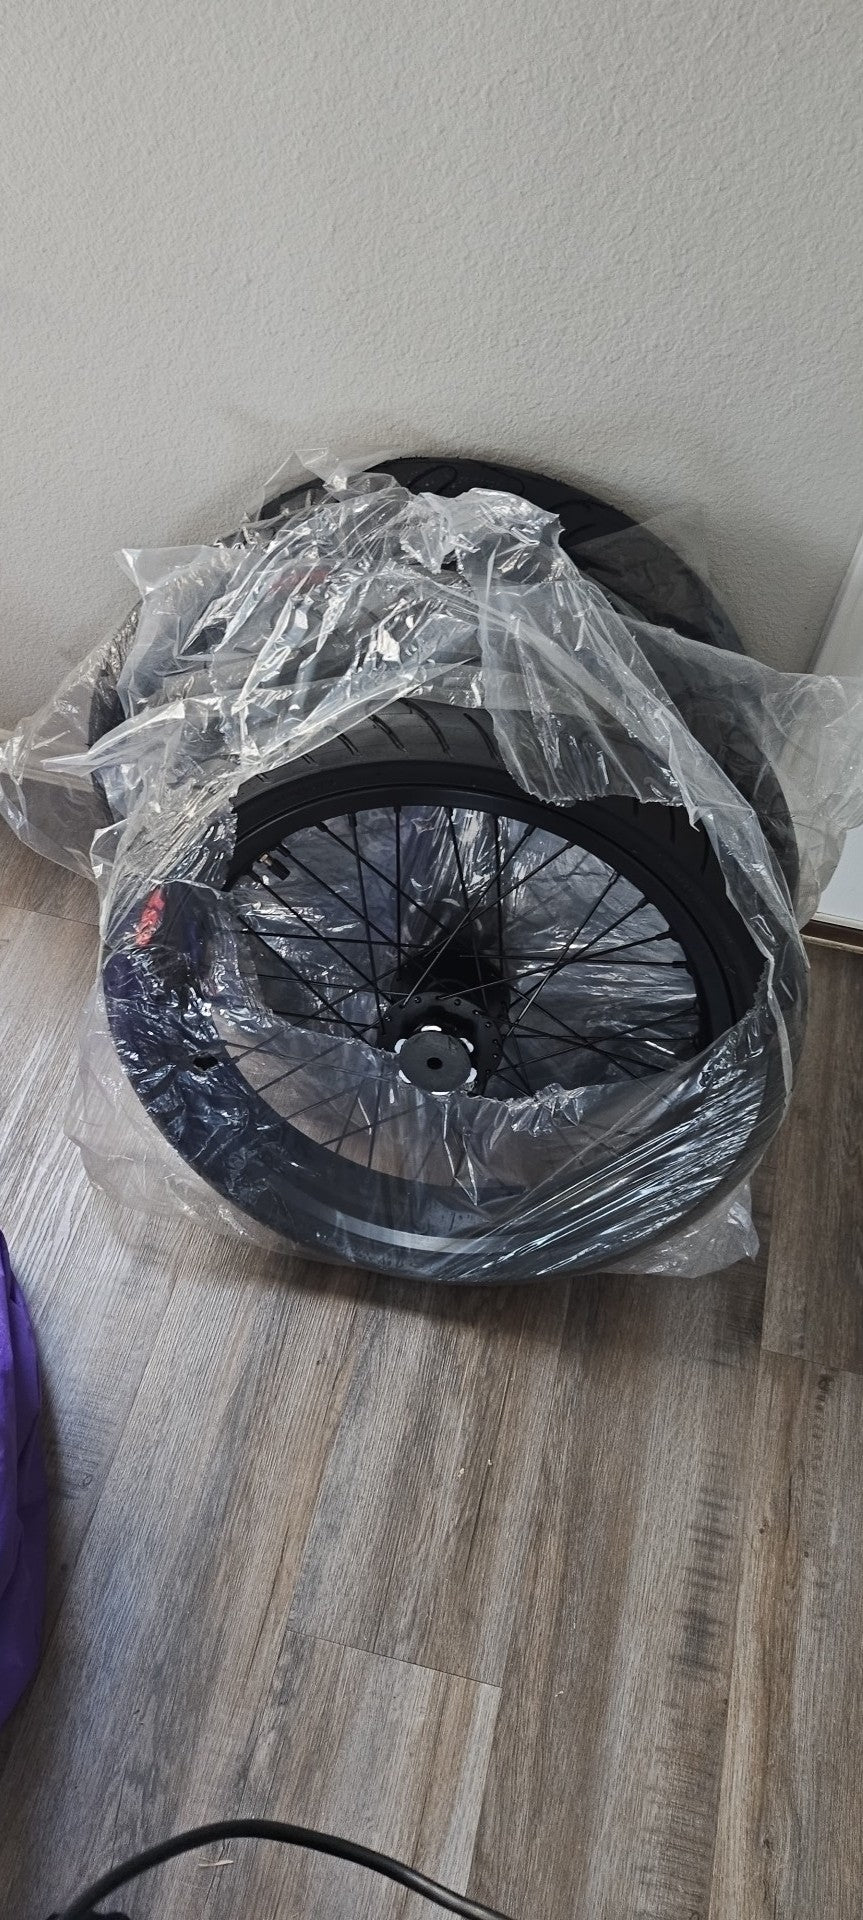 Surron Supermoto Wheel Set 17inch OEM All blacked out